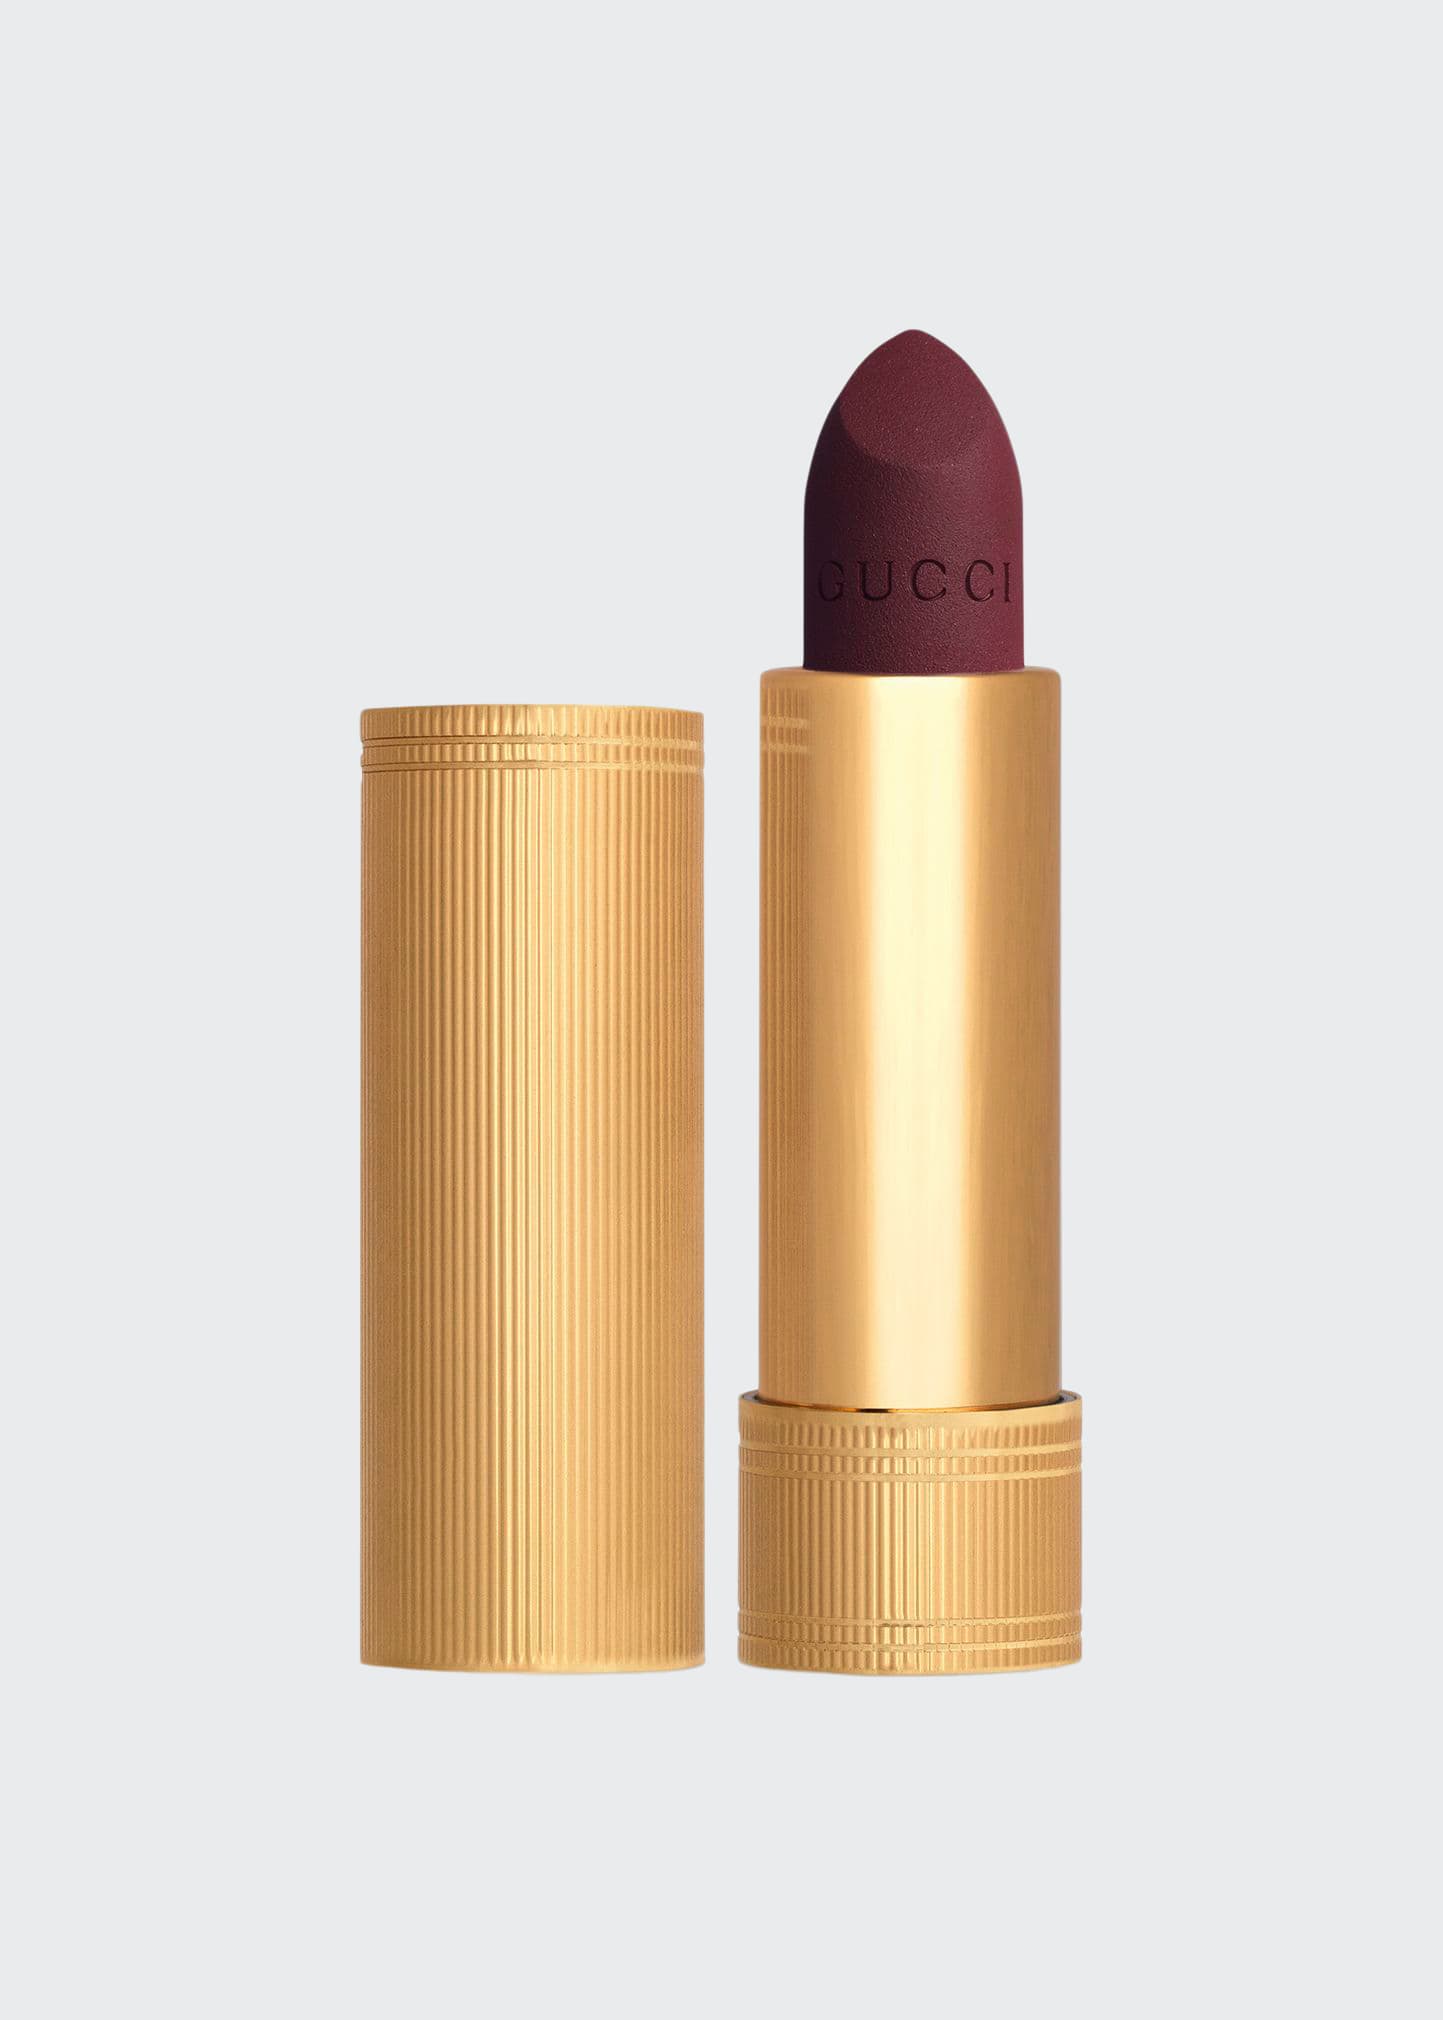 Gucci Rouge A Levres Matte Lipstick In 510 Burgundy